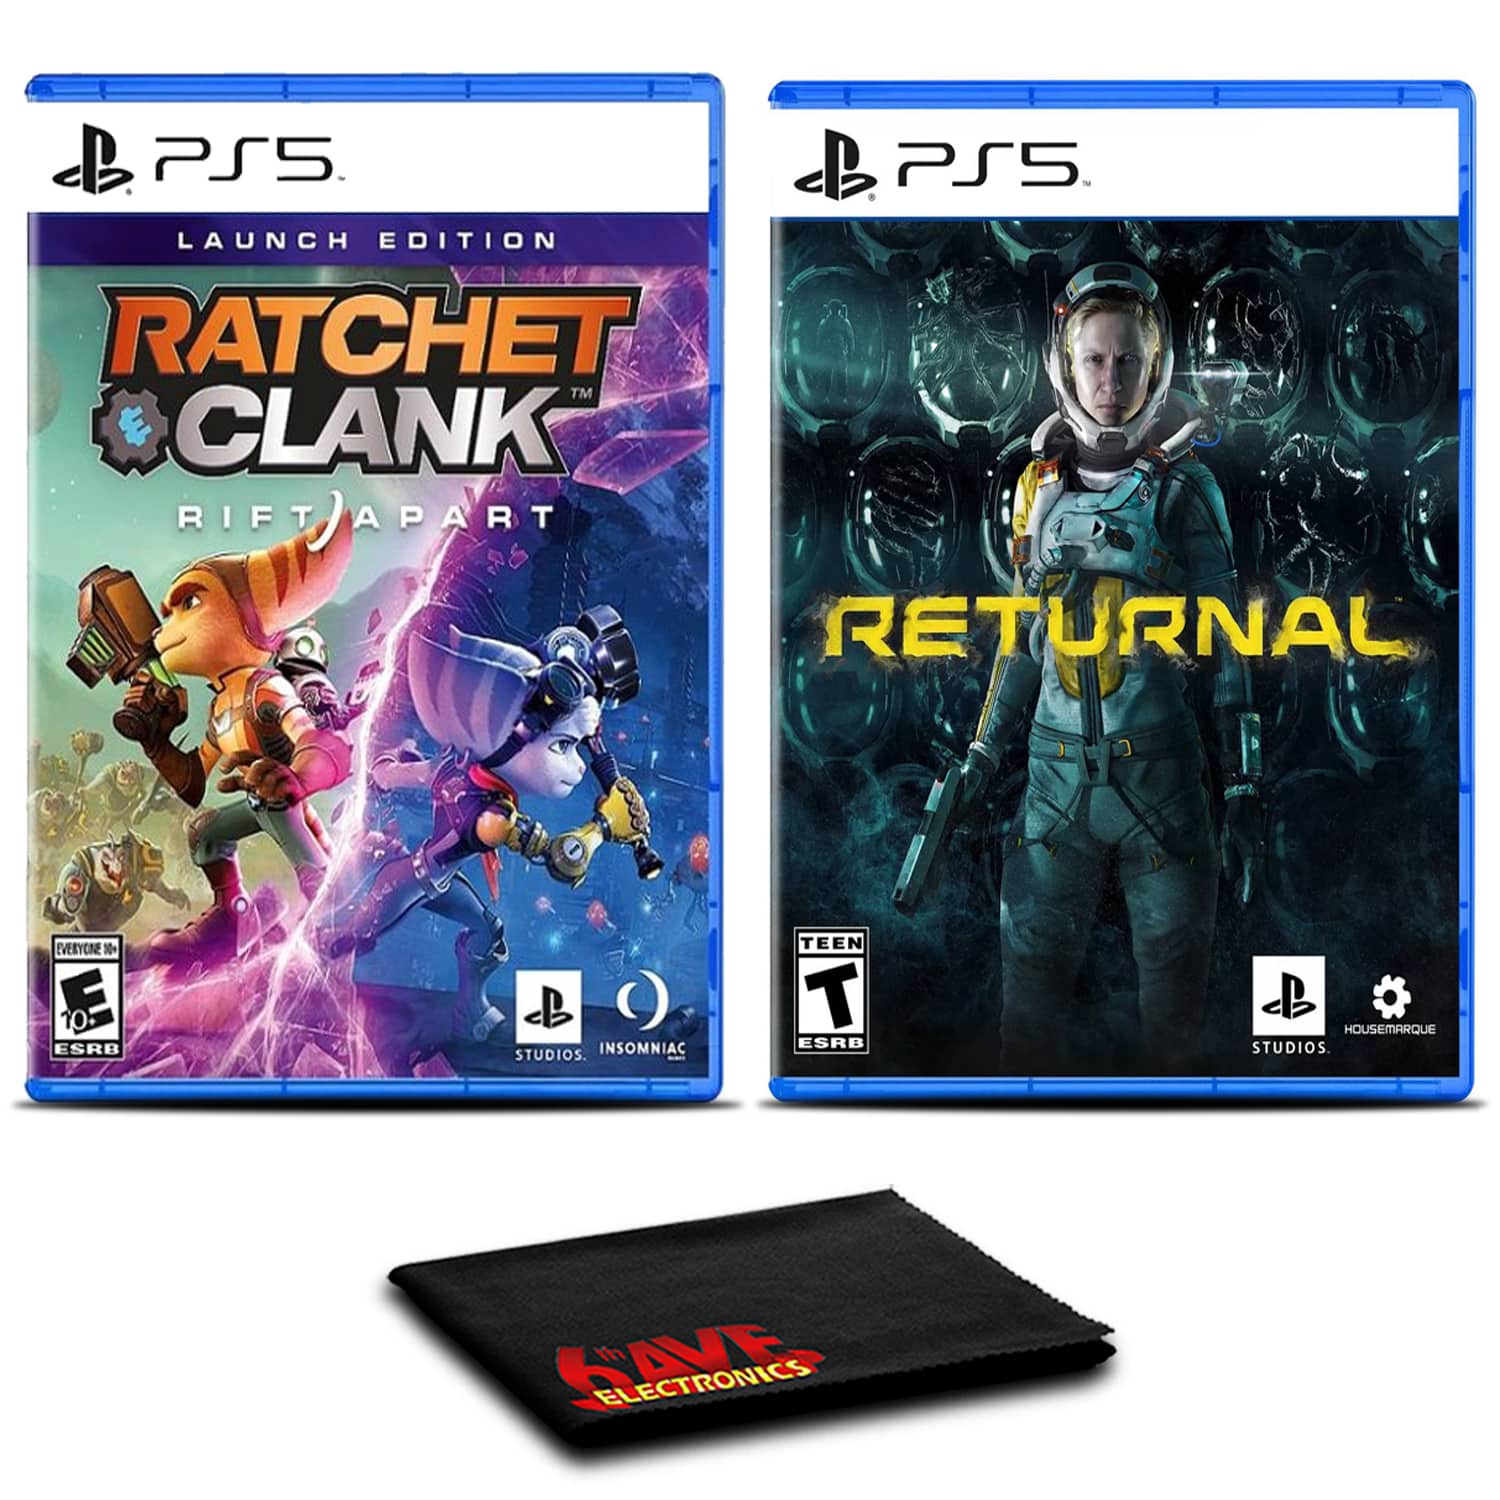 Ratchet and Clank: Rift Apart and Returnal